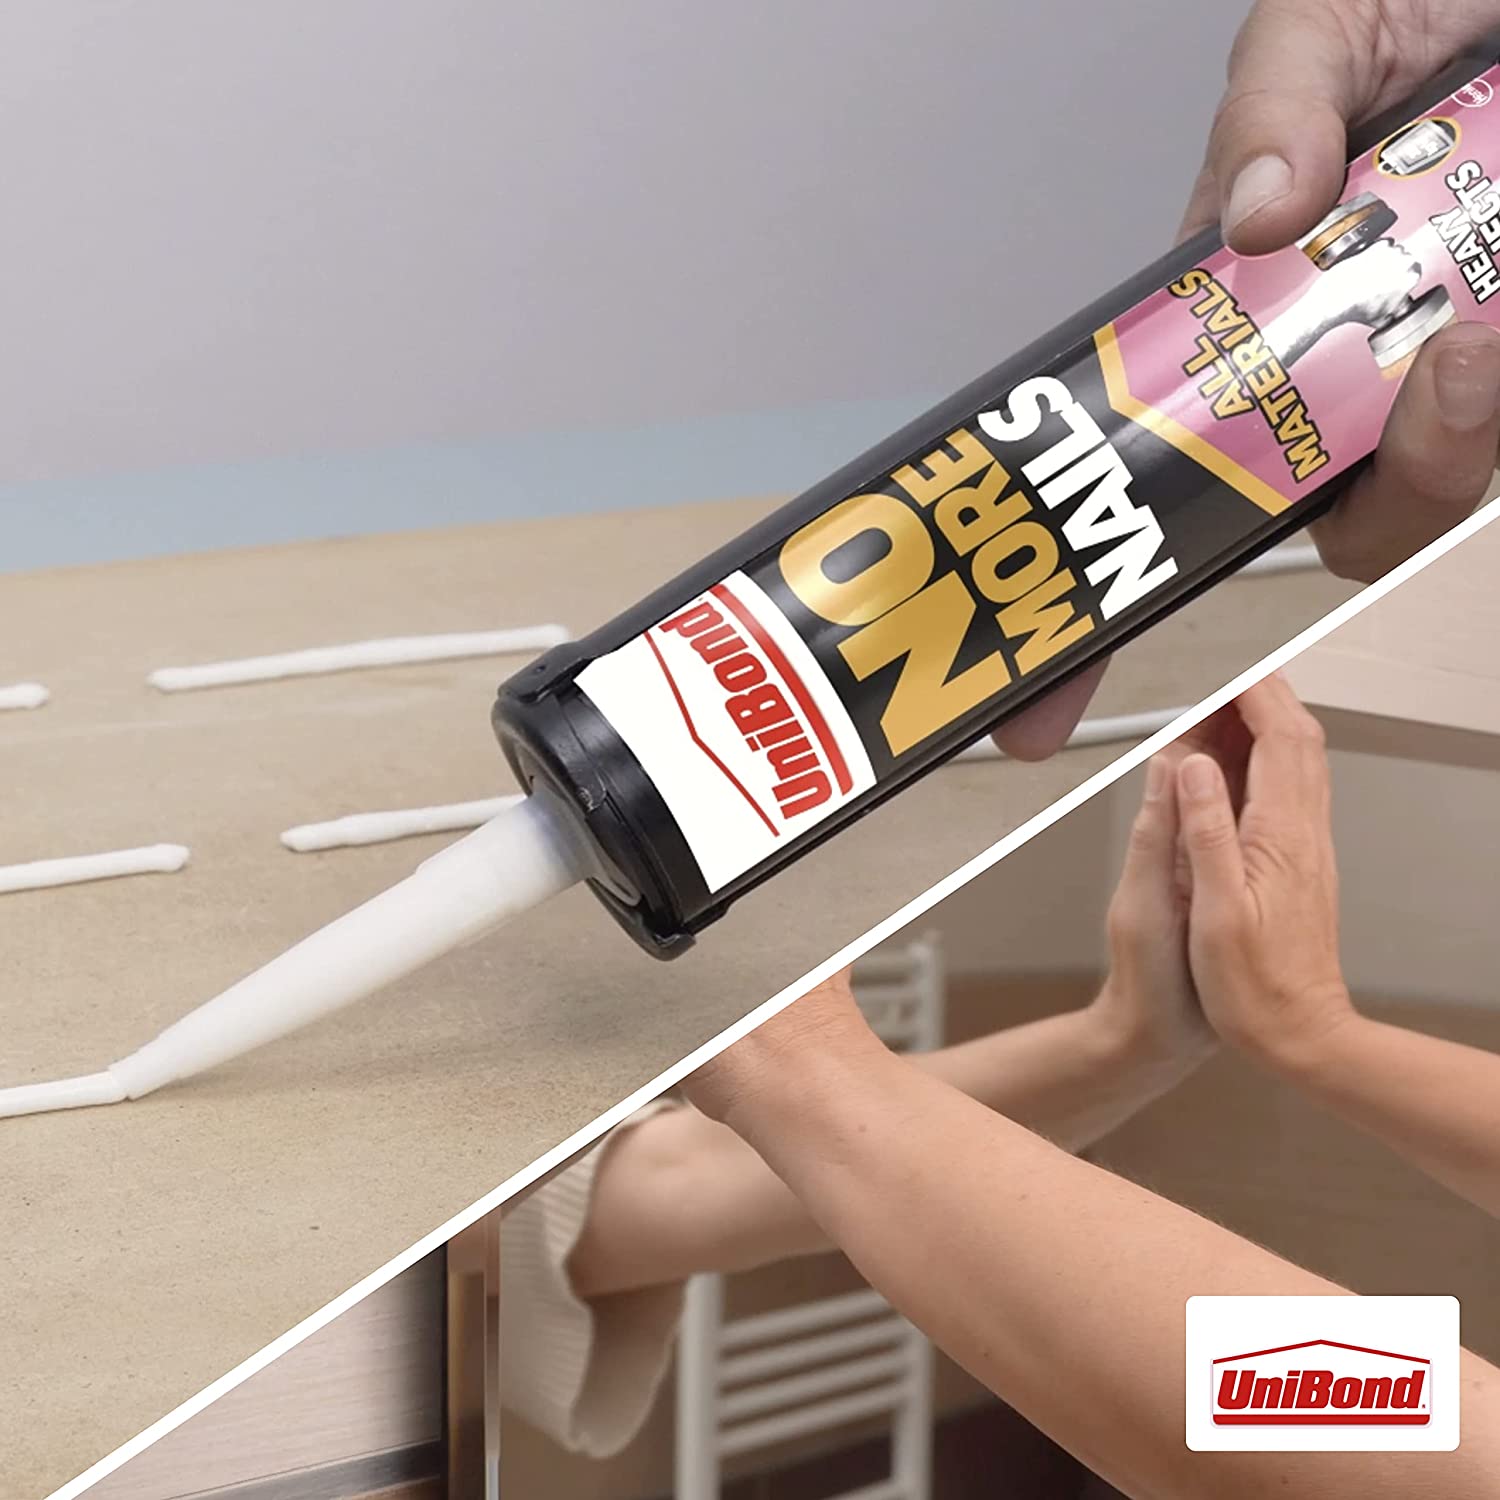 Adhesives | Unibond No More Nails All Materials Heavy Objects by Weirs of Baggot St